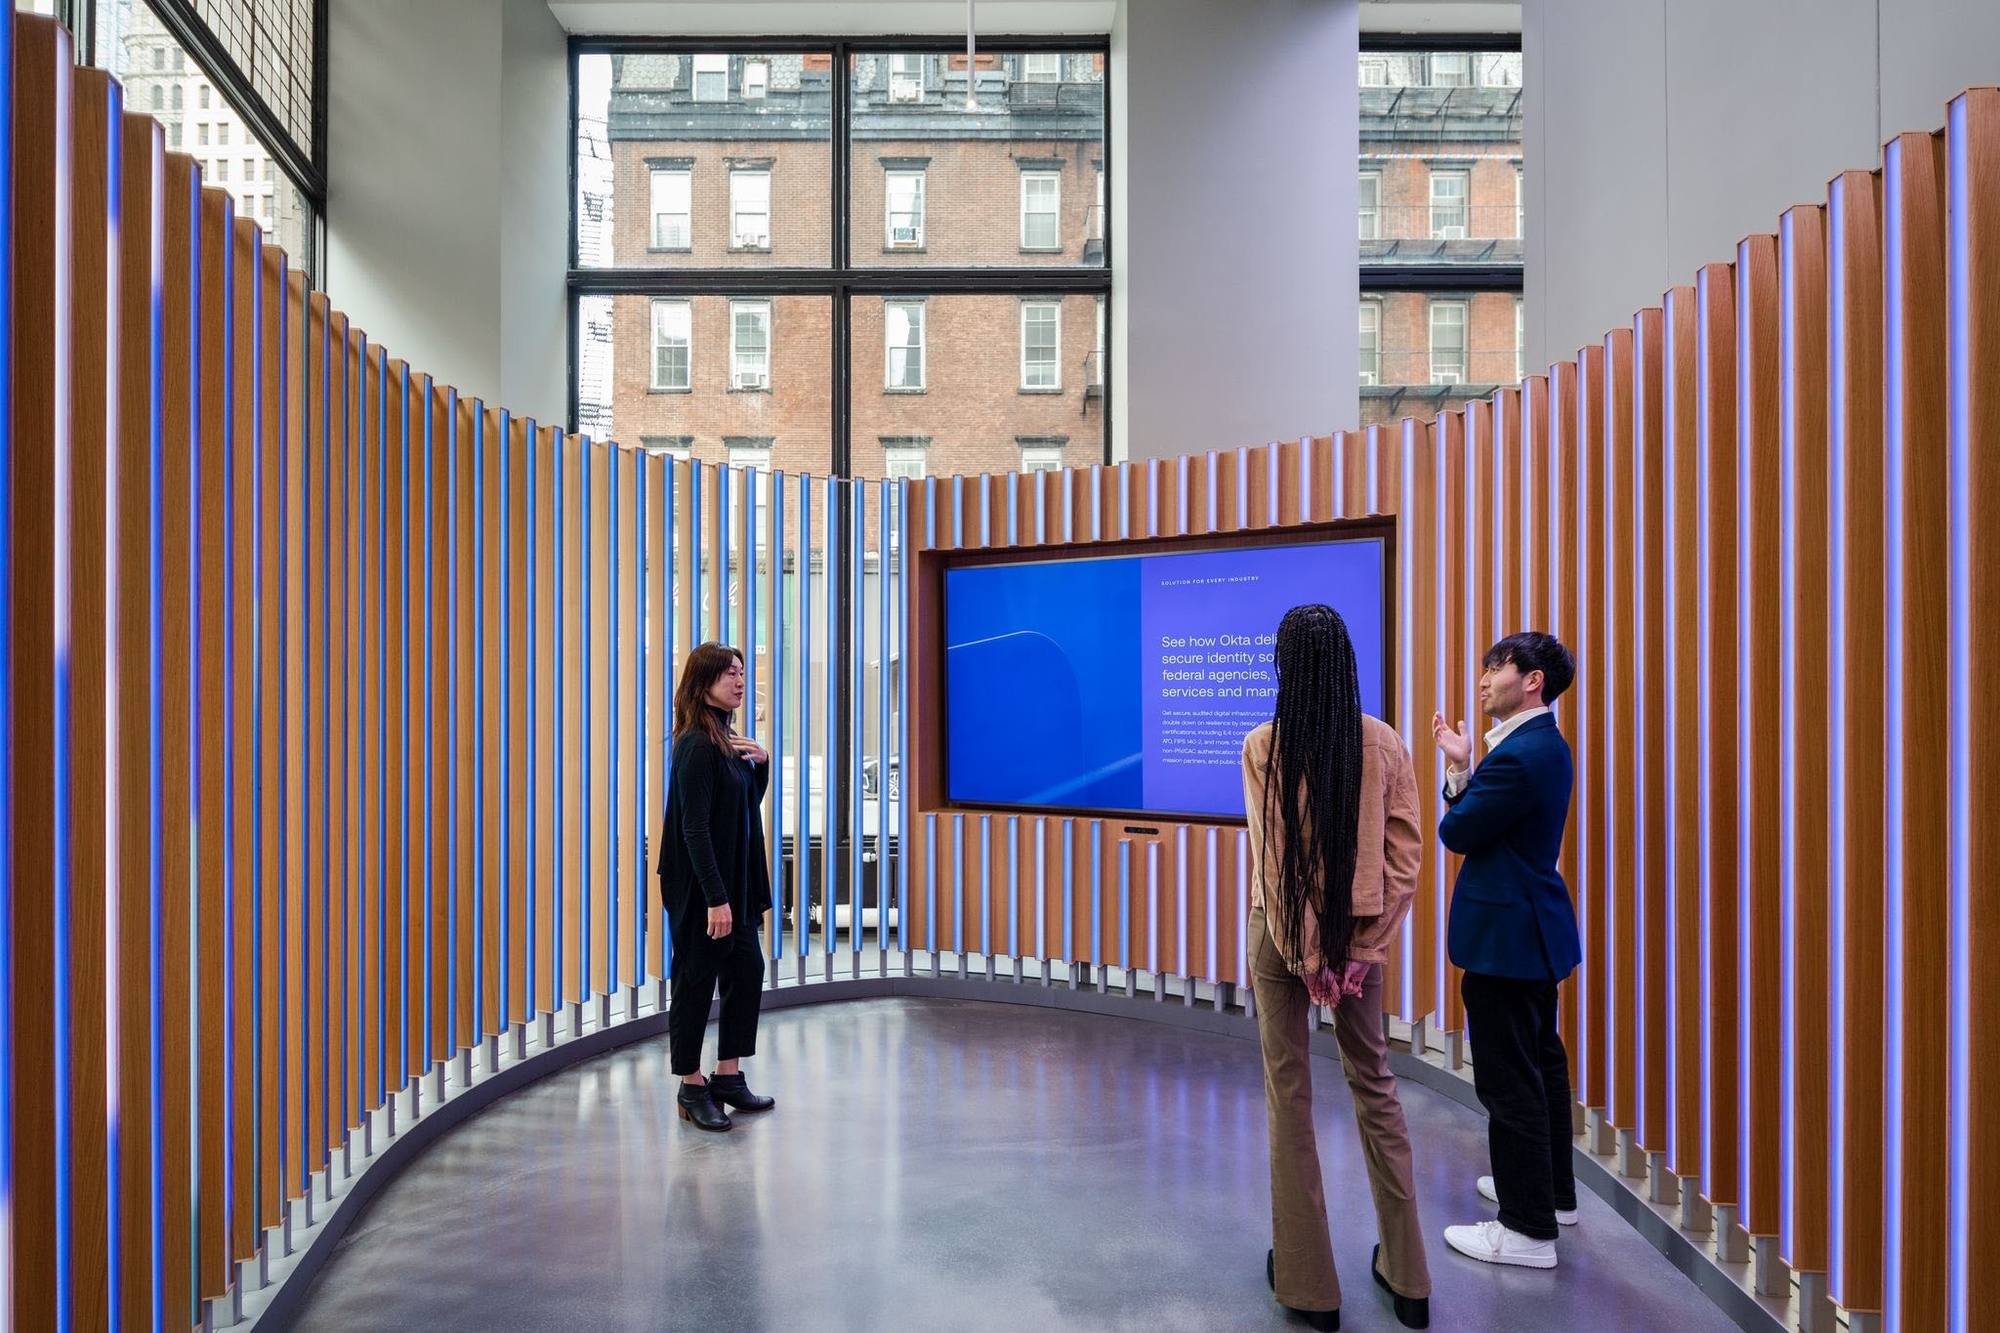 Three visitors at the sales center on the interior of the installation, looking at content on a large digital screen